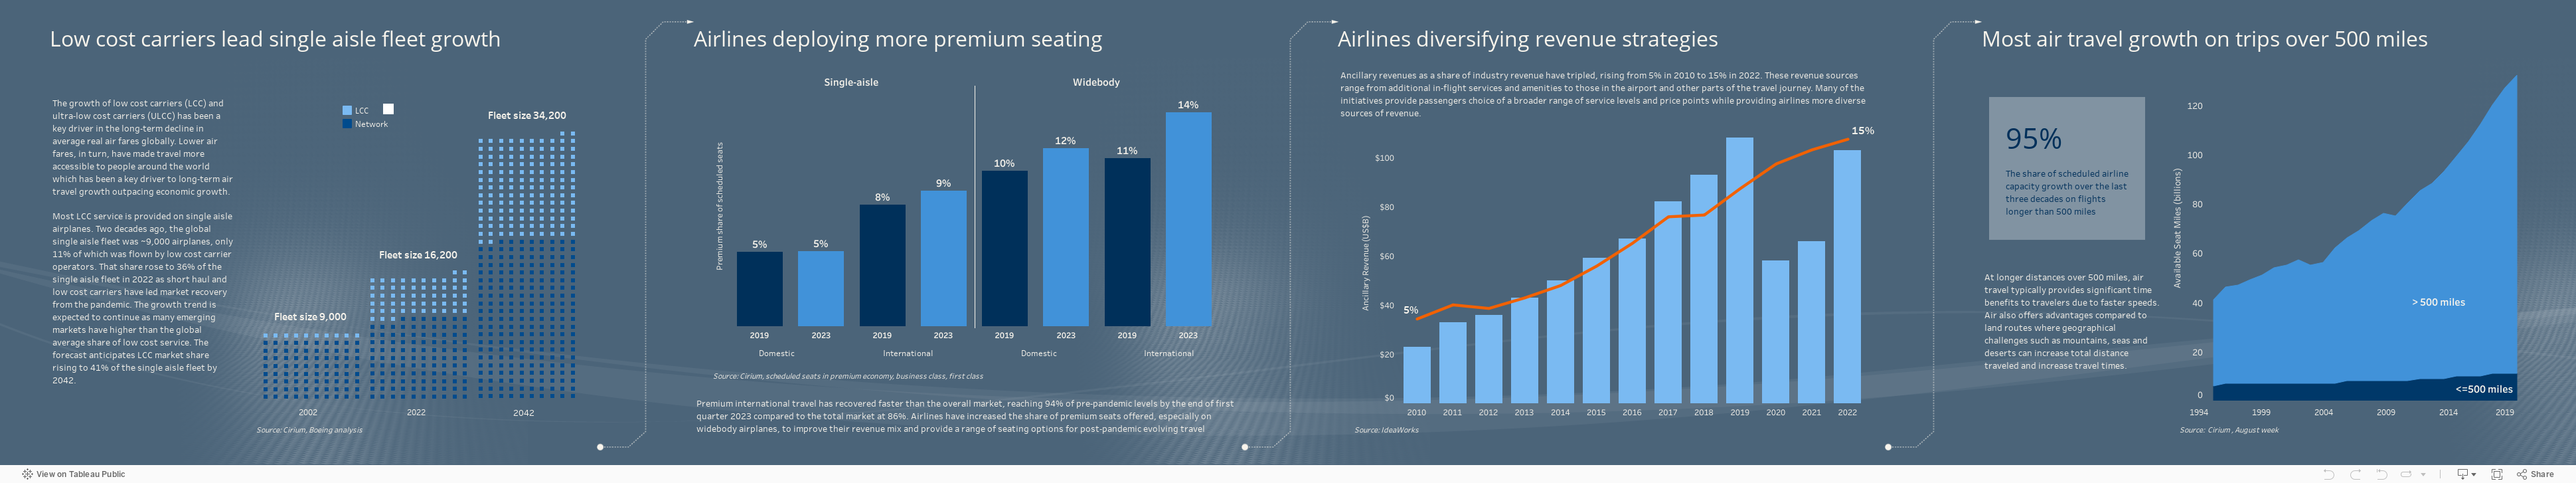 Passenger and Airline Trends 